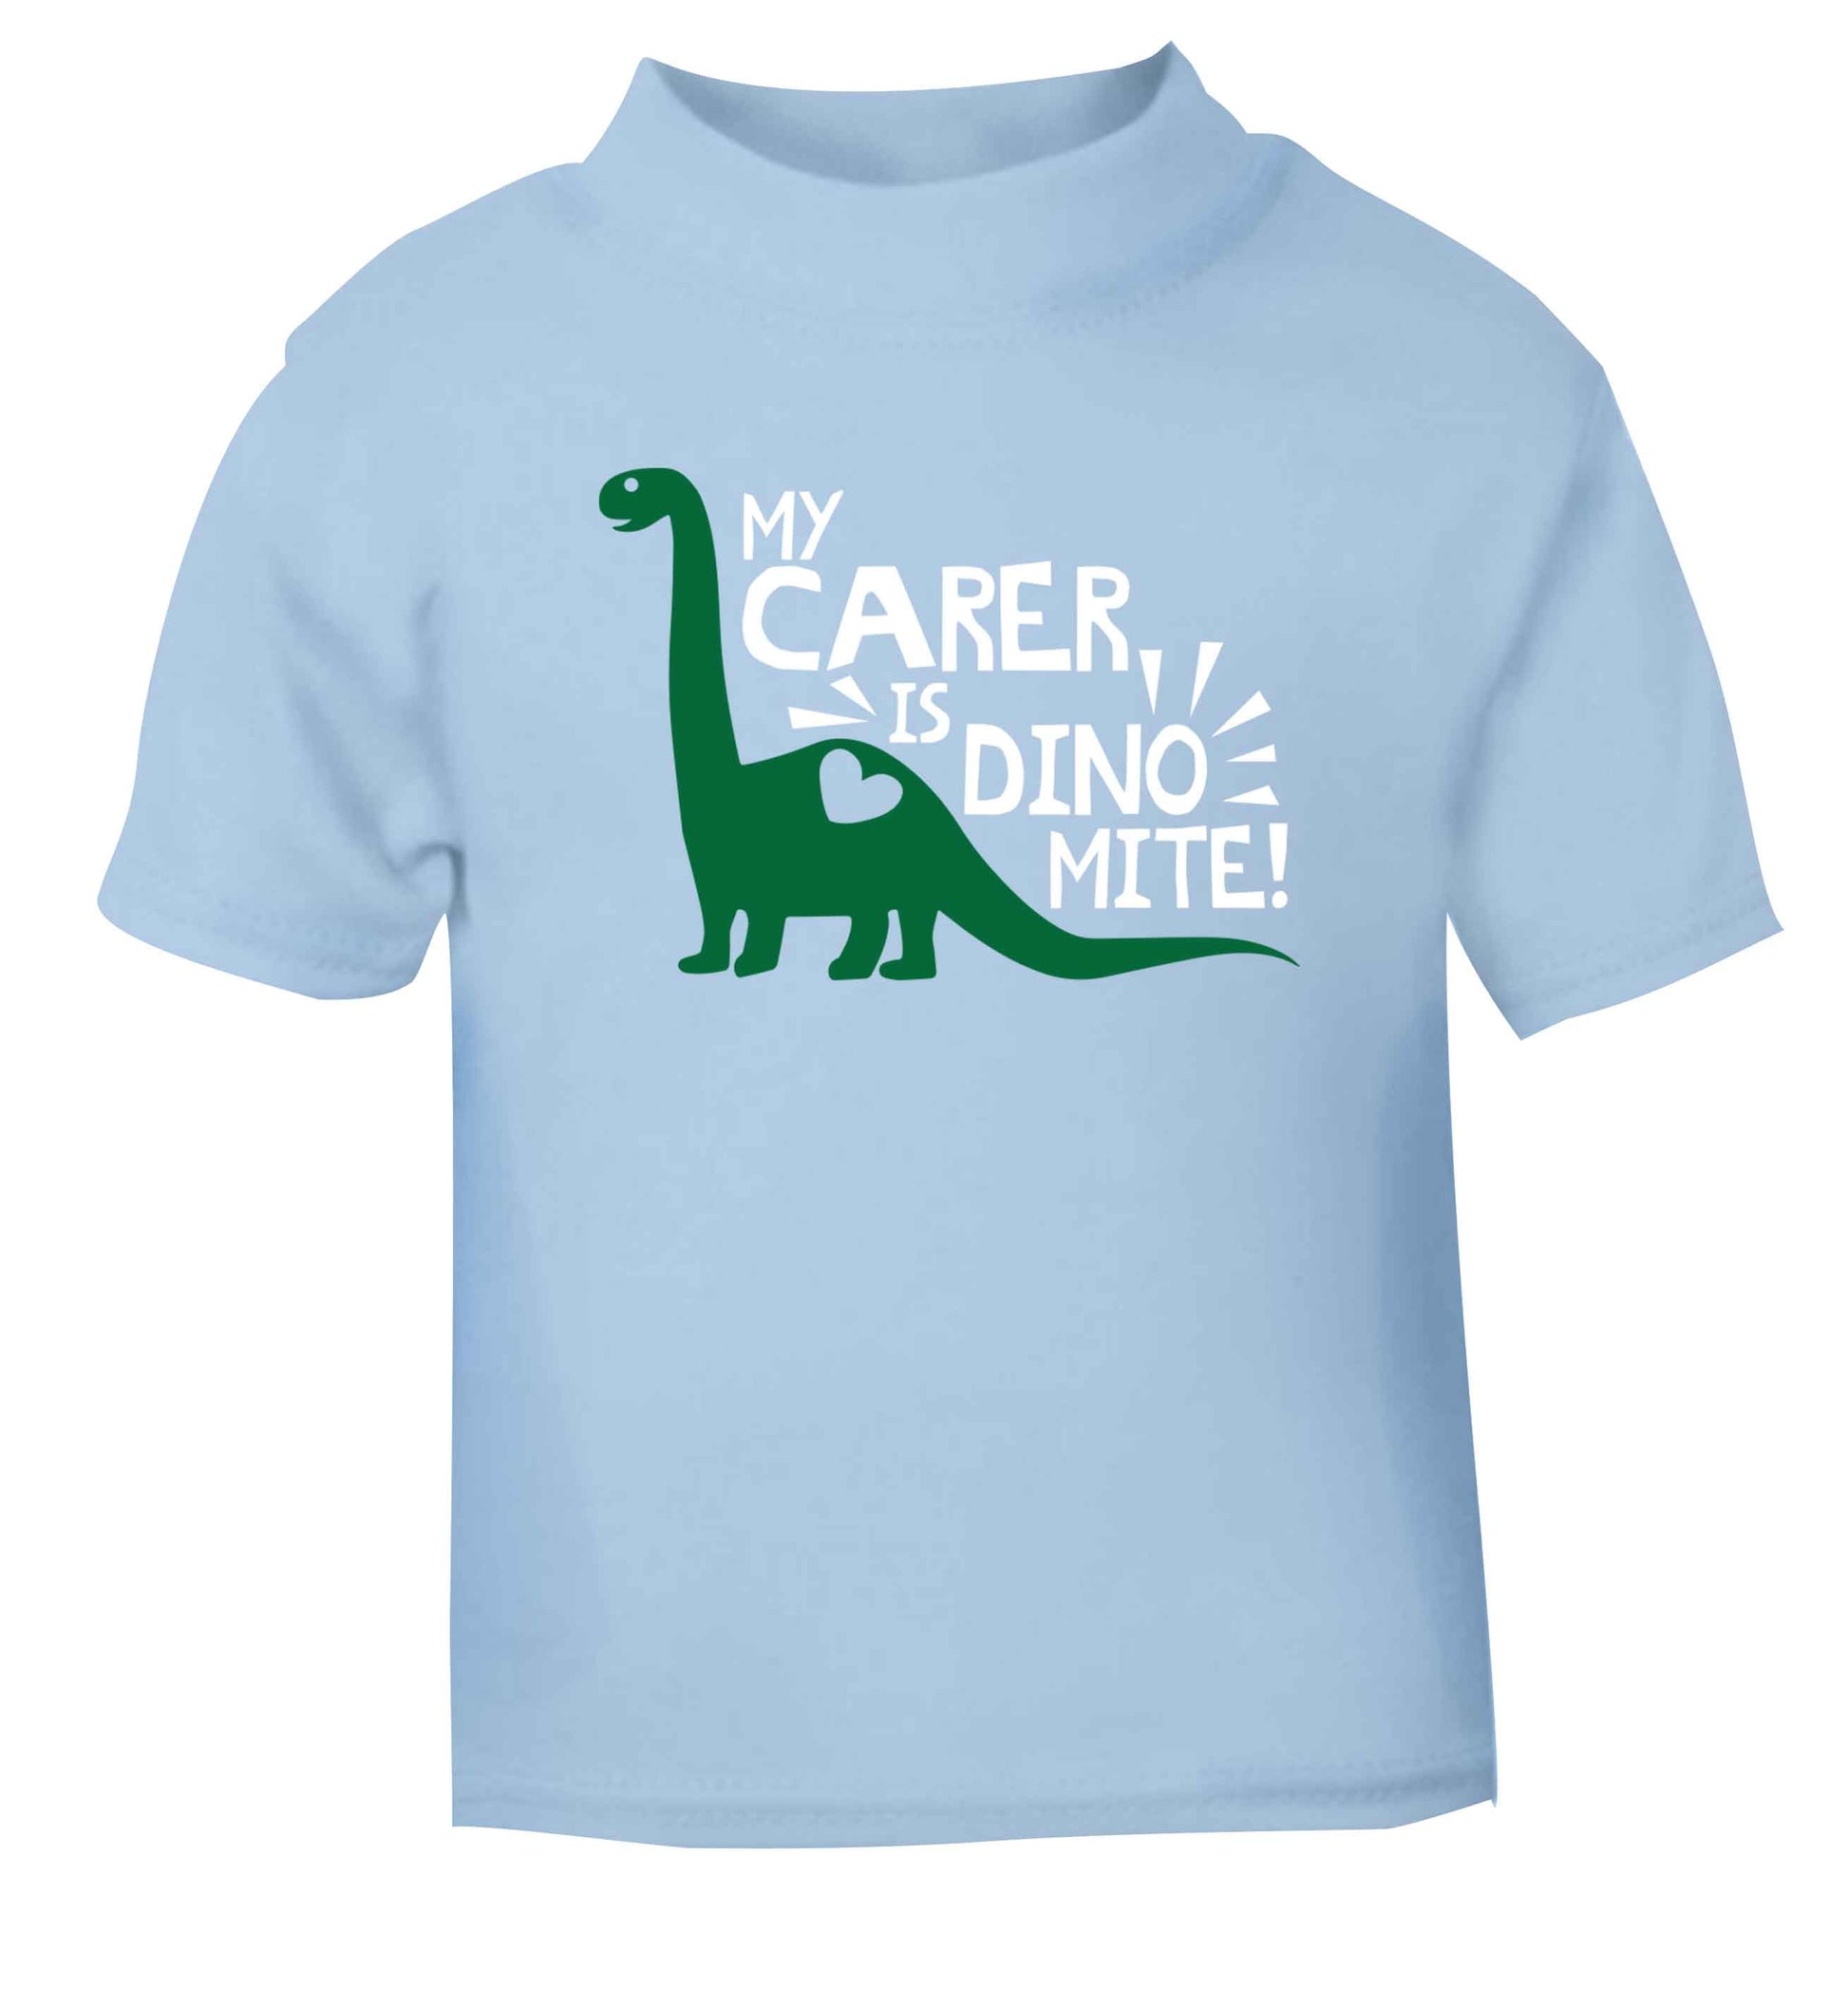 My carer is dinomite! light blue Baby Toddler Tshirt 2 Years